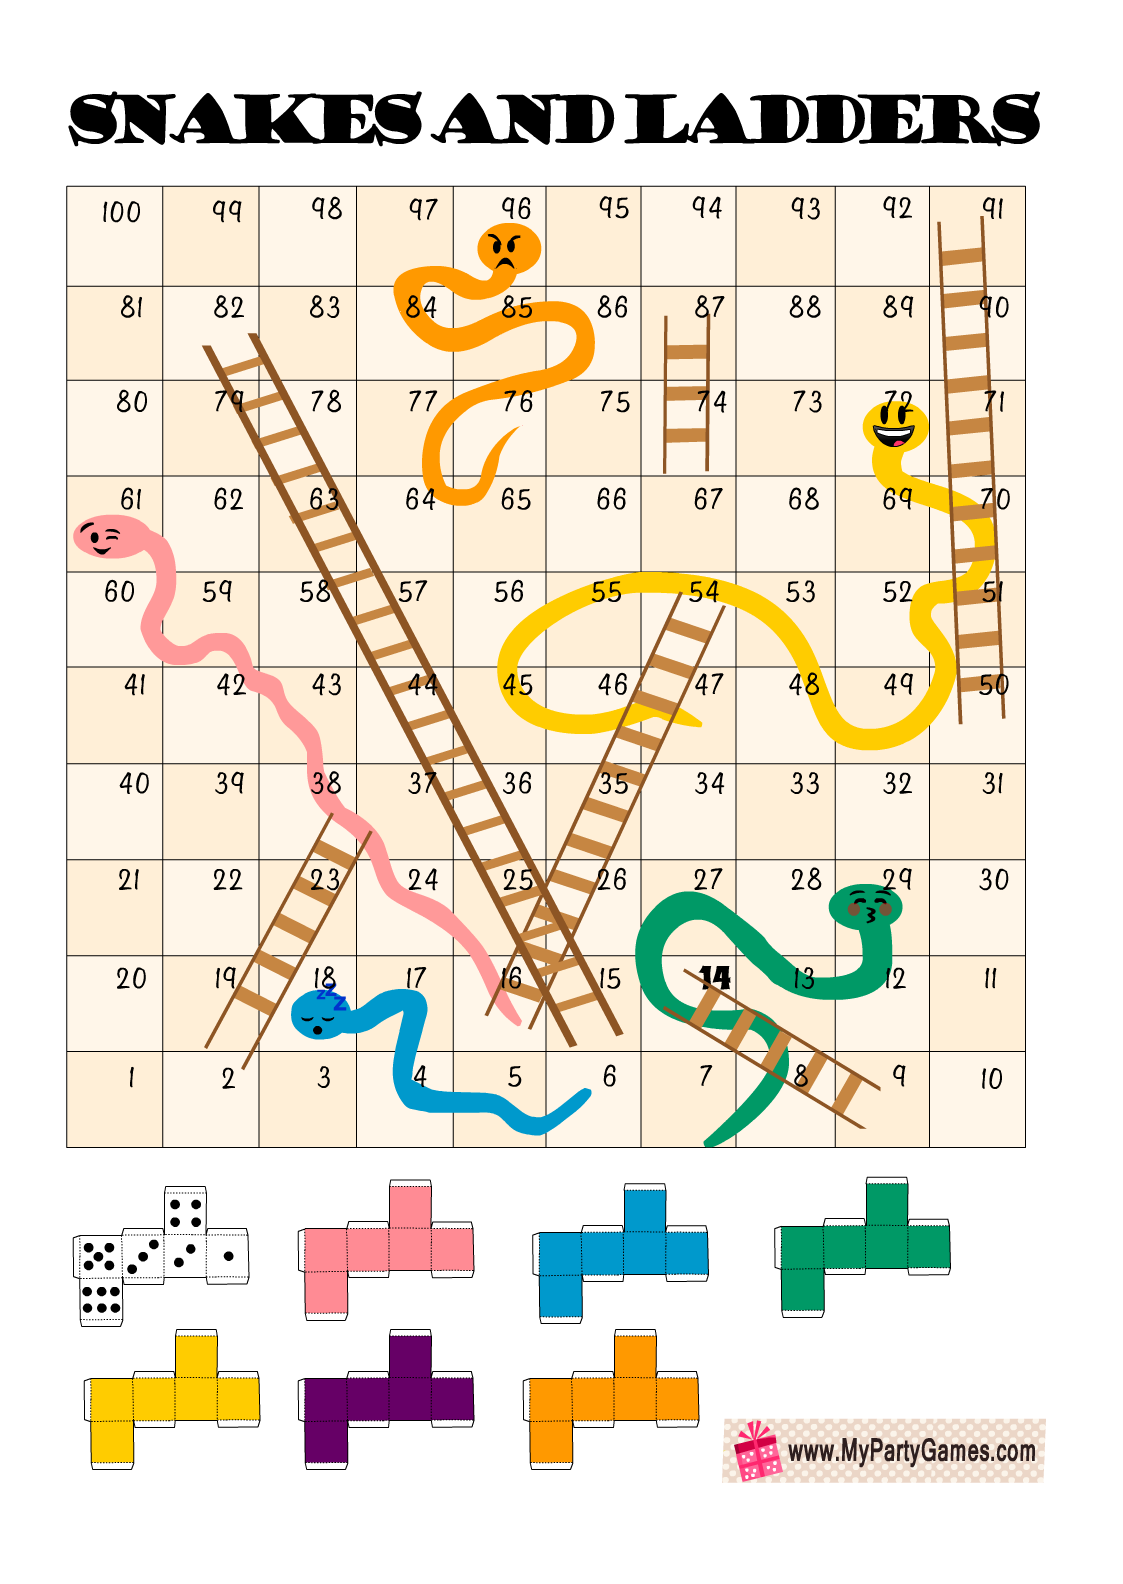 Snakes and Ladders Board Game 5 Free Printables